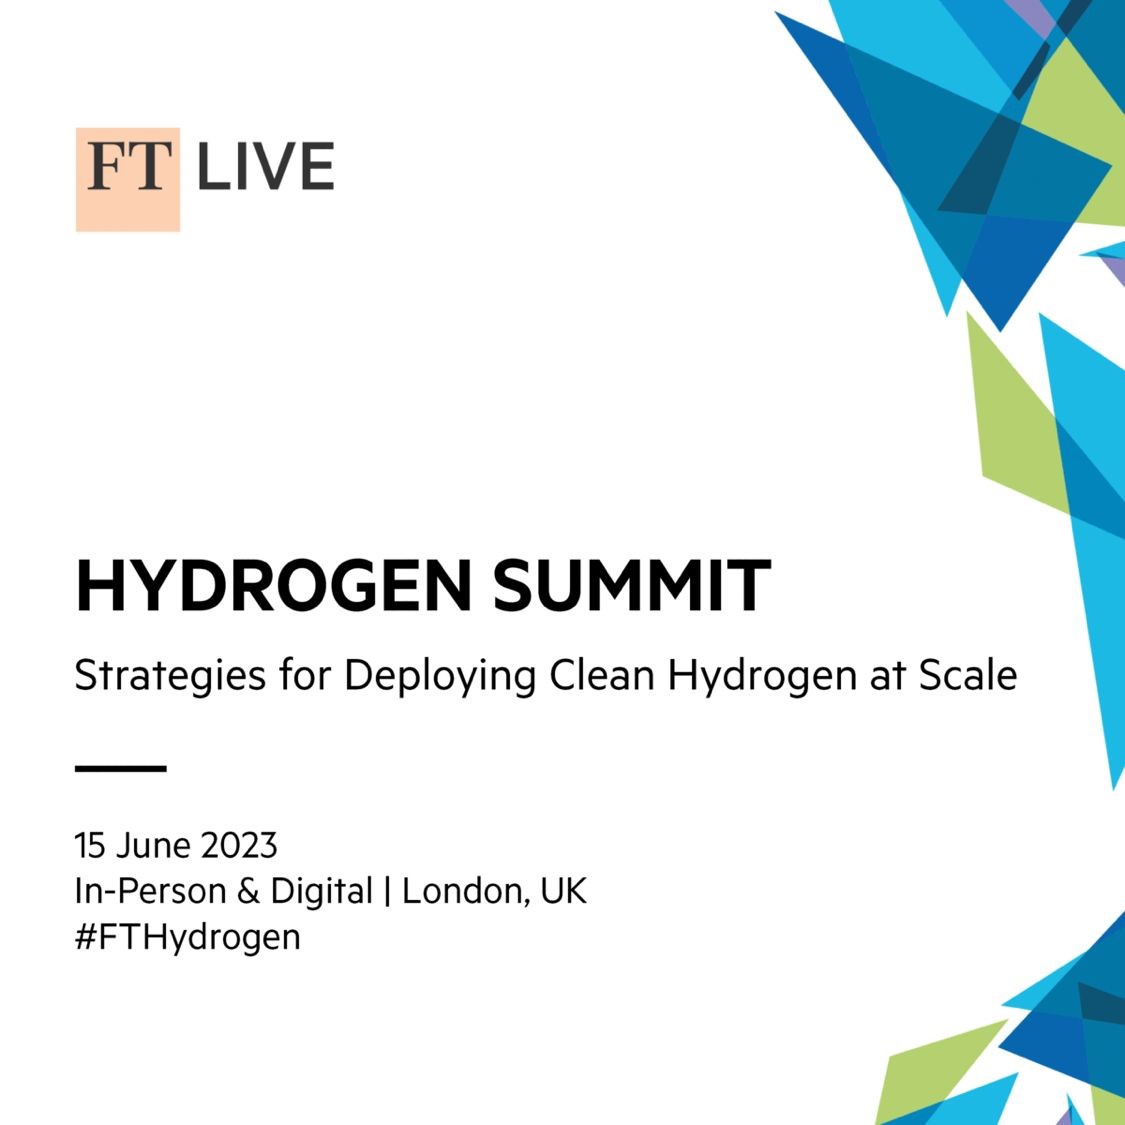 On Thursday, @BaisterCharlie will be attending the FT Hydrogen Summit. The focus this year is on how to deploy clean #hydrogen at scale.

Sign up to our New Energy distribution list to receive a post-event debrief: tavistock.us9.list-manage.com/subscribe?u=6b…

#cleantech #energy #FThydrogen #ammonia